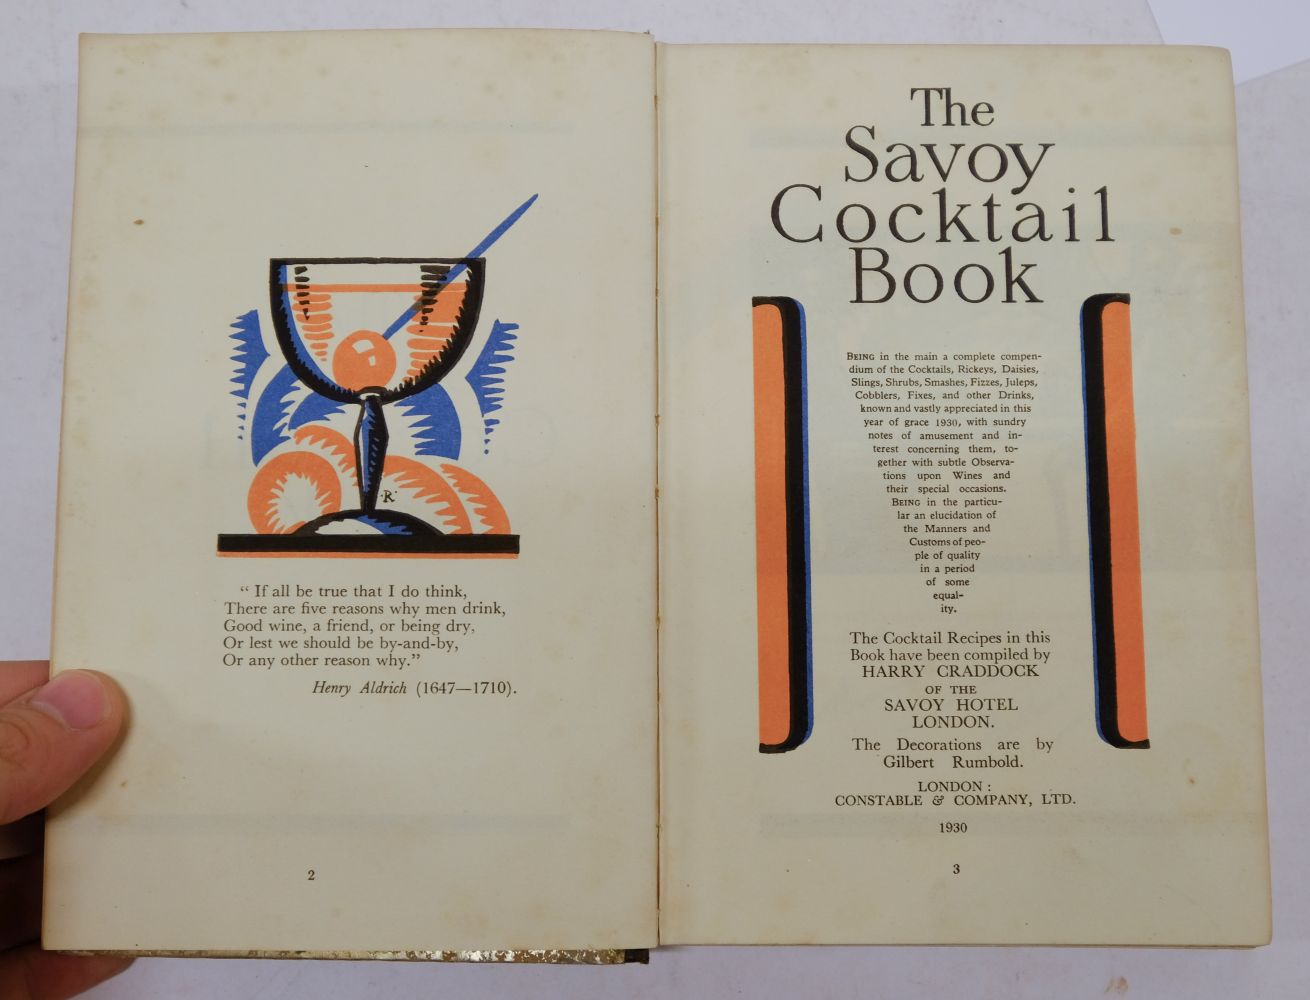 Craddock (Harry). The Savoy Cocktail Book, 1st edition, Constable & Co., 1930 - Image 5 of 7